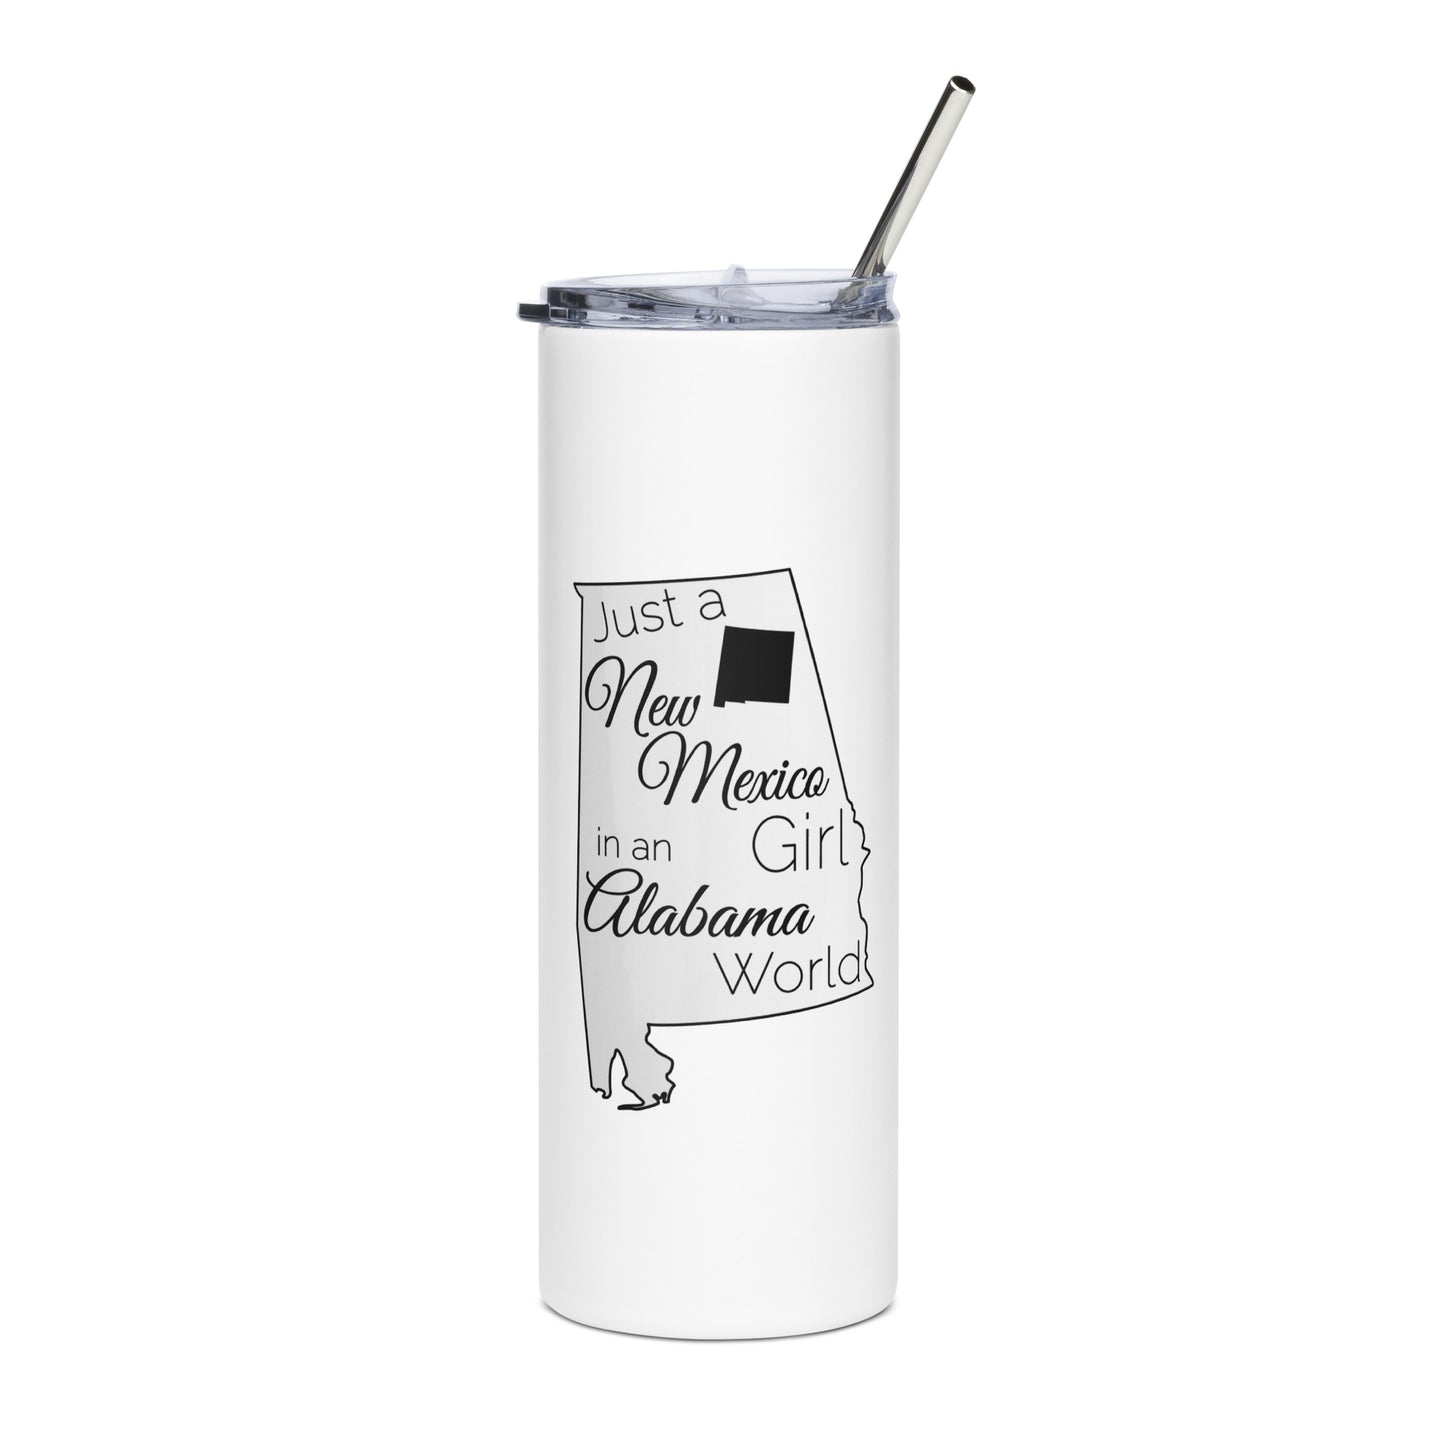 Just a New Mexico Girl in an Alabama World Stainless steel tumbler